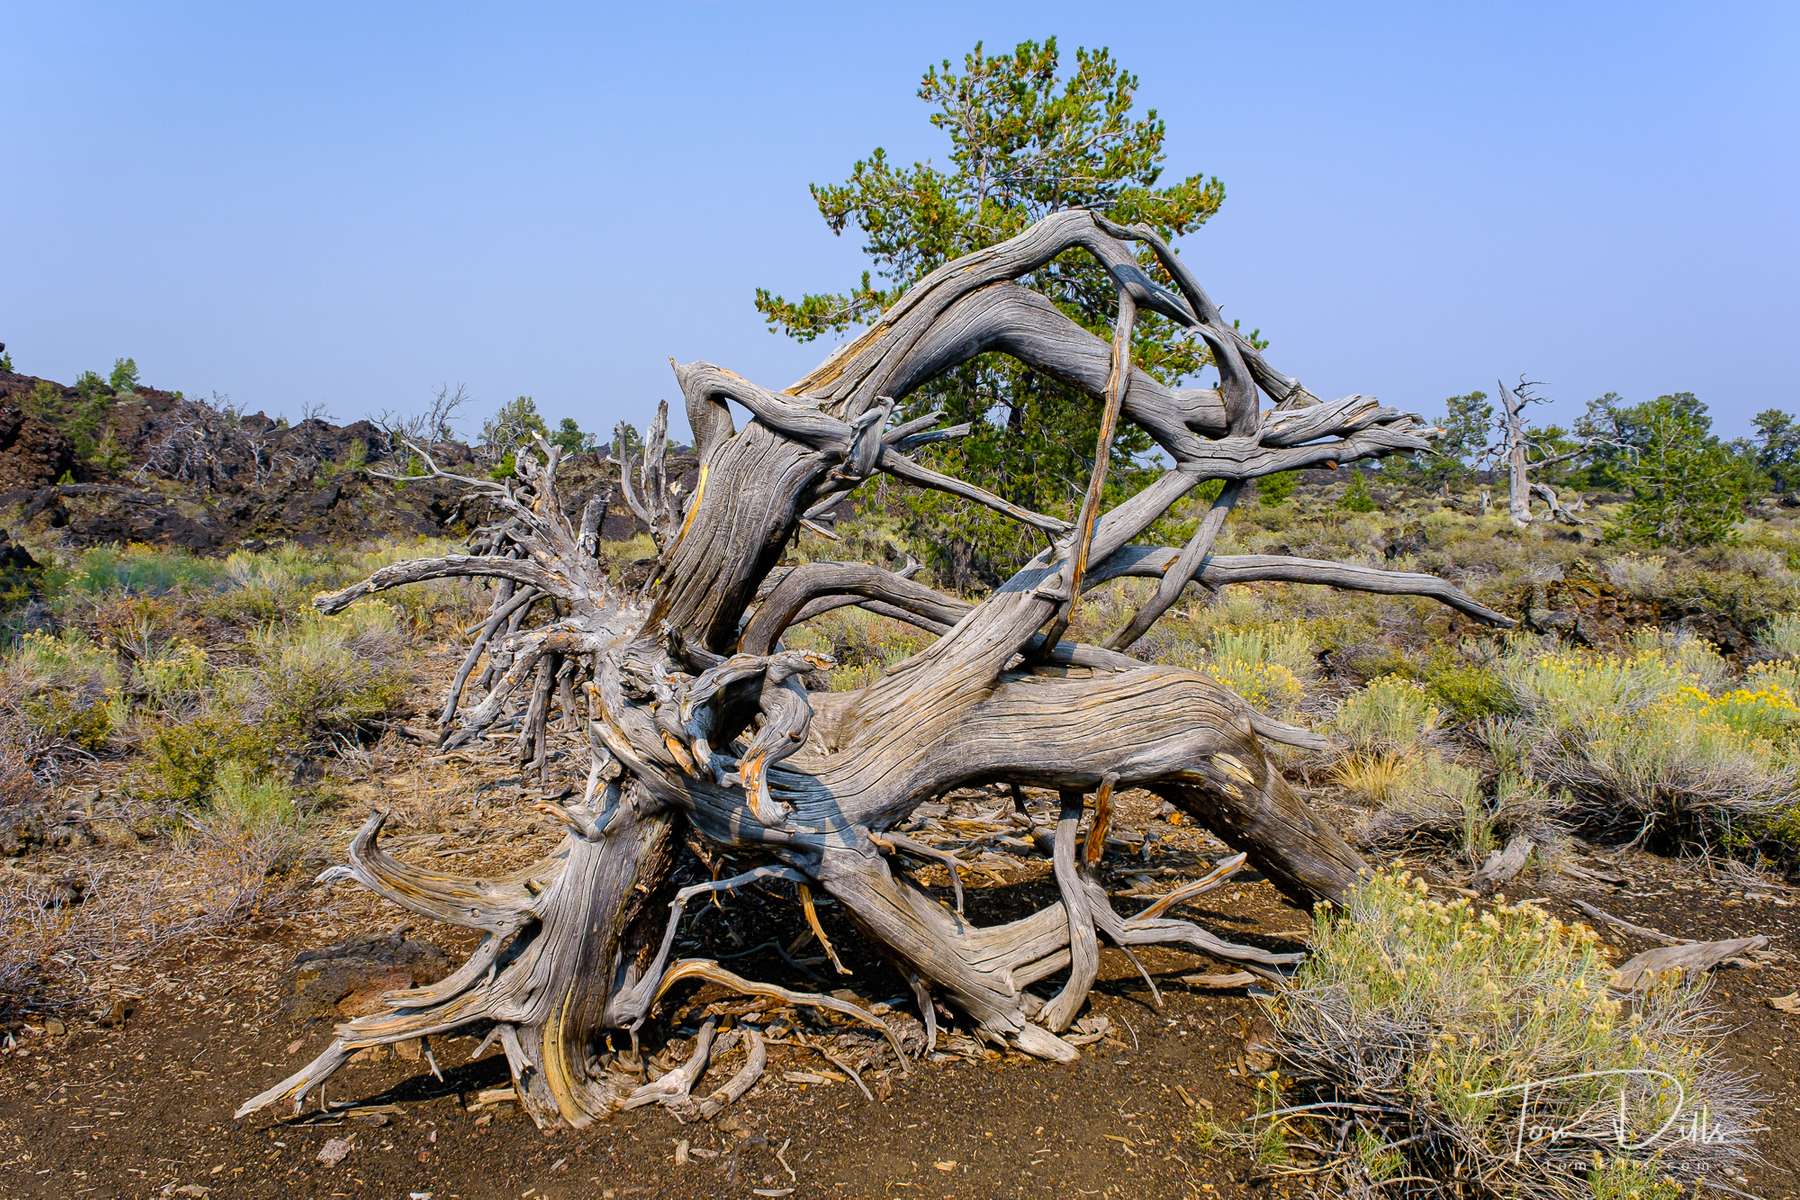 Craters of the Moon National Monument and Preserve near Arco, Idaho